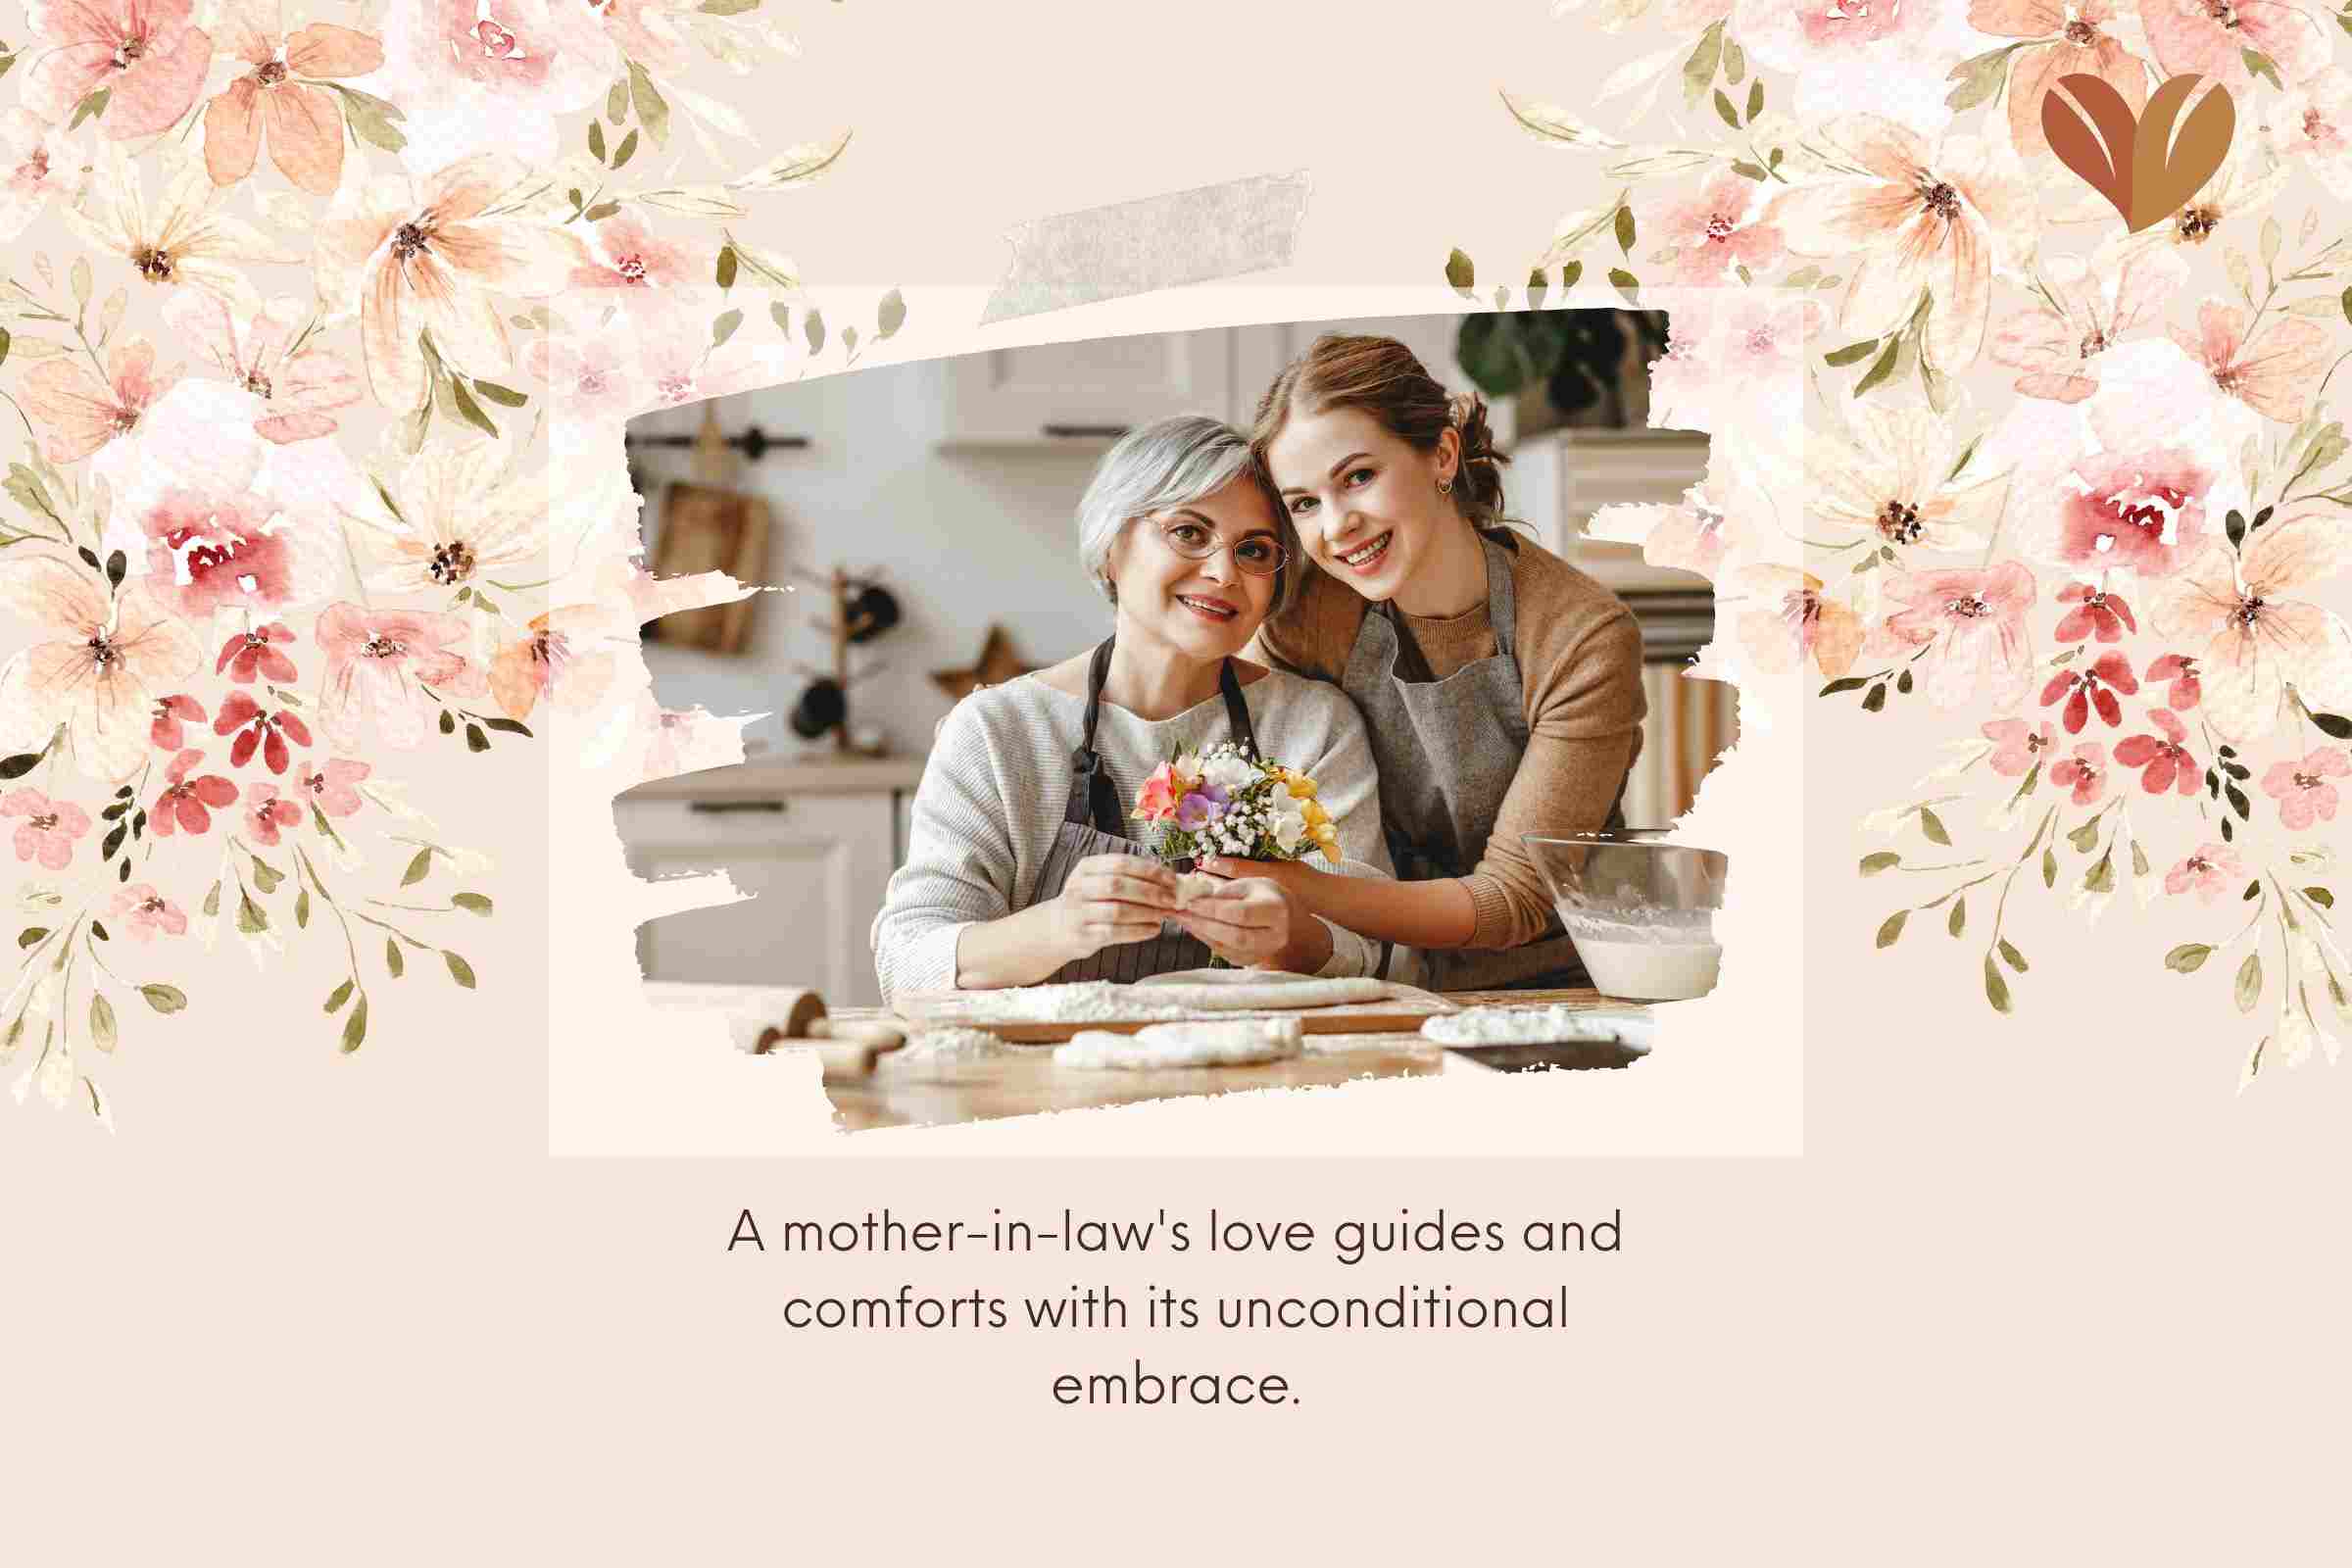 Thank You Messages for Mother in Law: A mother-in-law's love guides and comforts with its unconditional embrace.